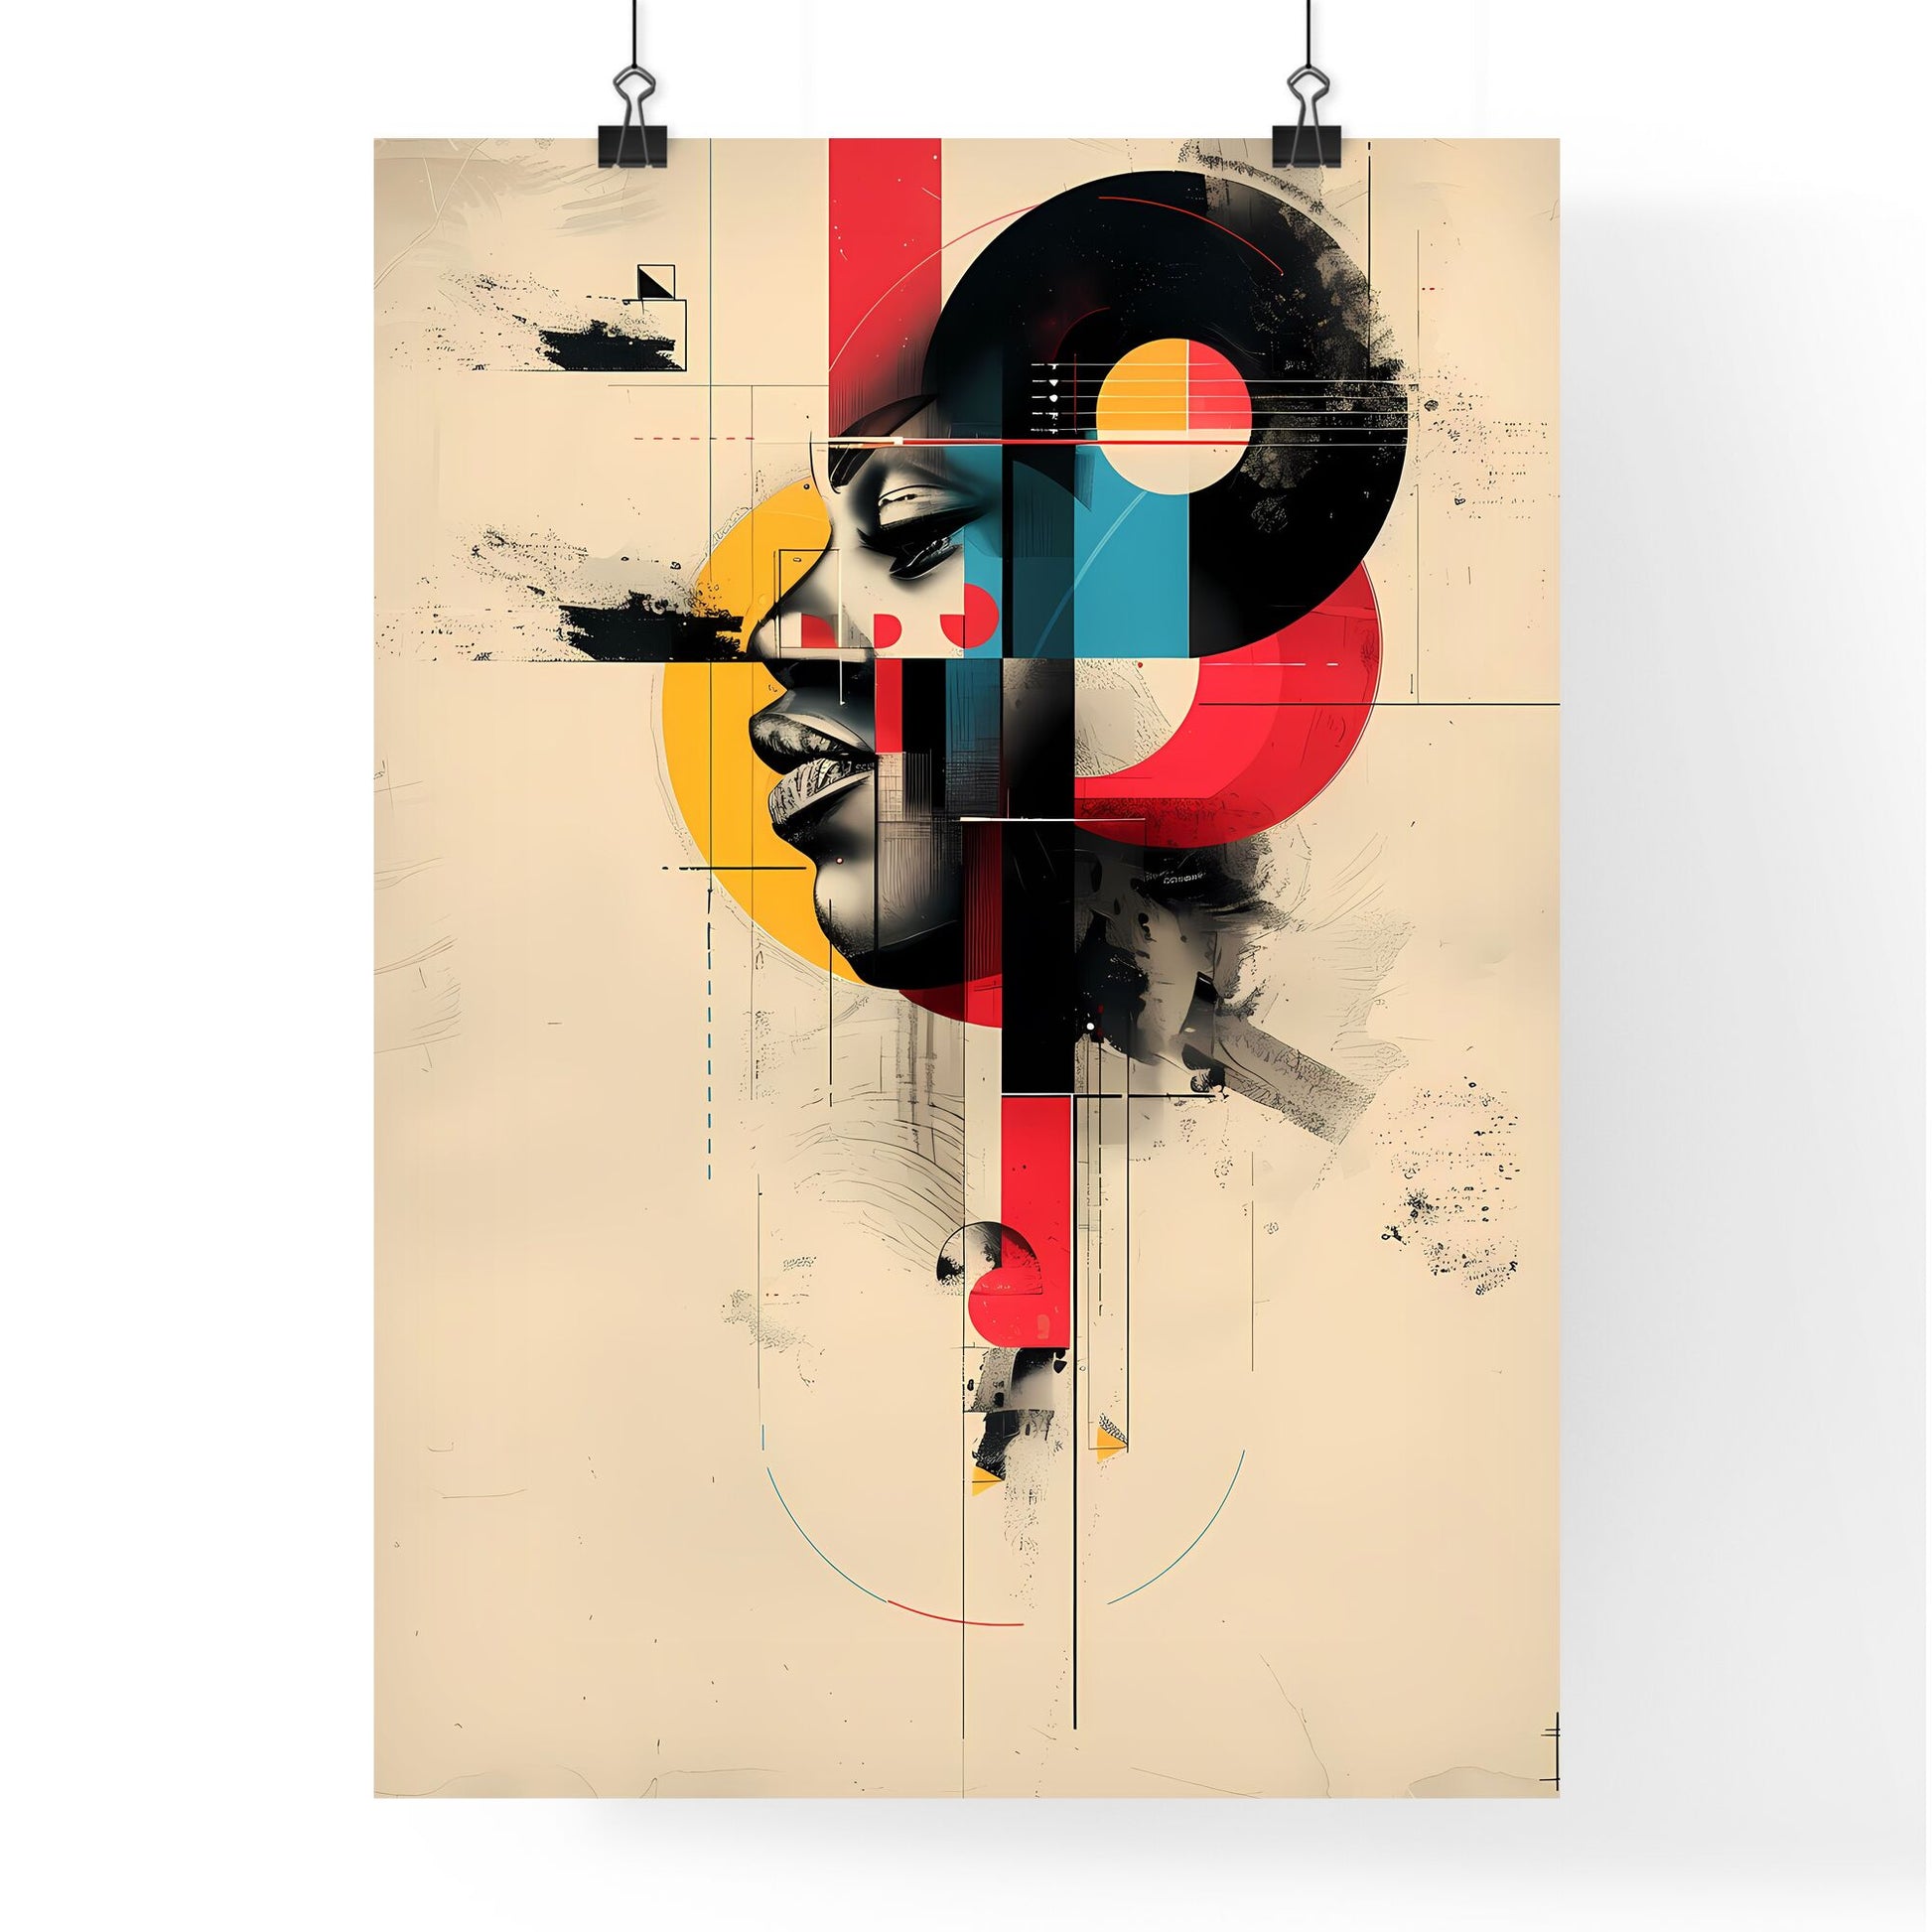 Bauhaus-inspired Artwork: Vibrant Painting Capturing the Essence of this Influential Design Movement Default Title